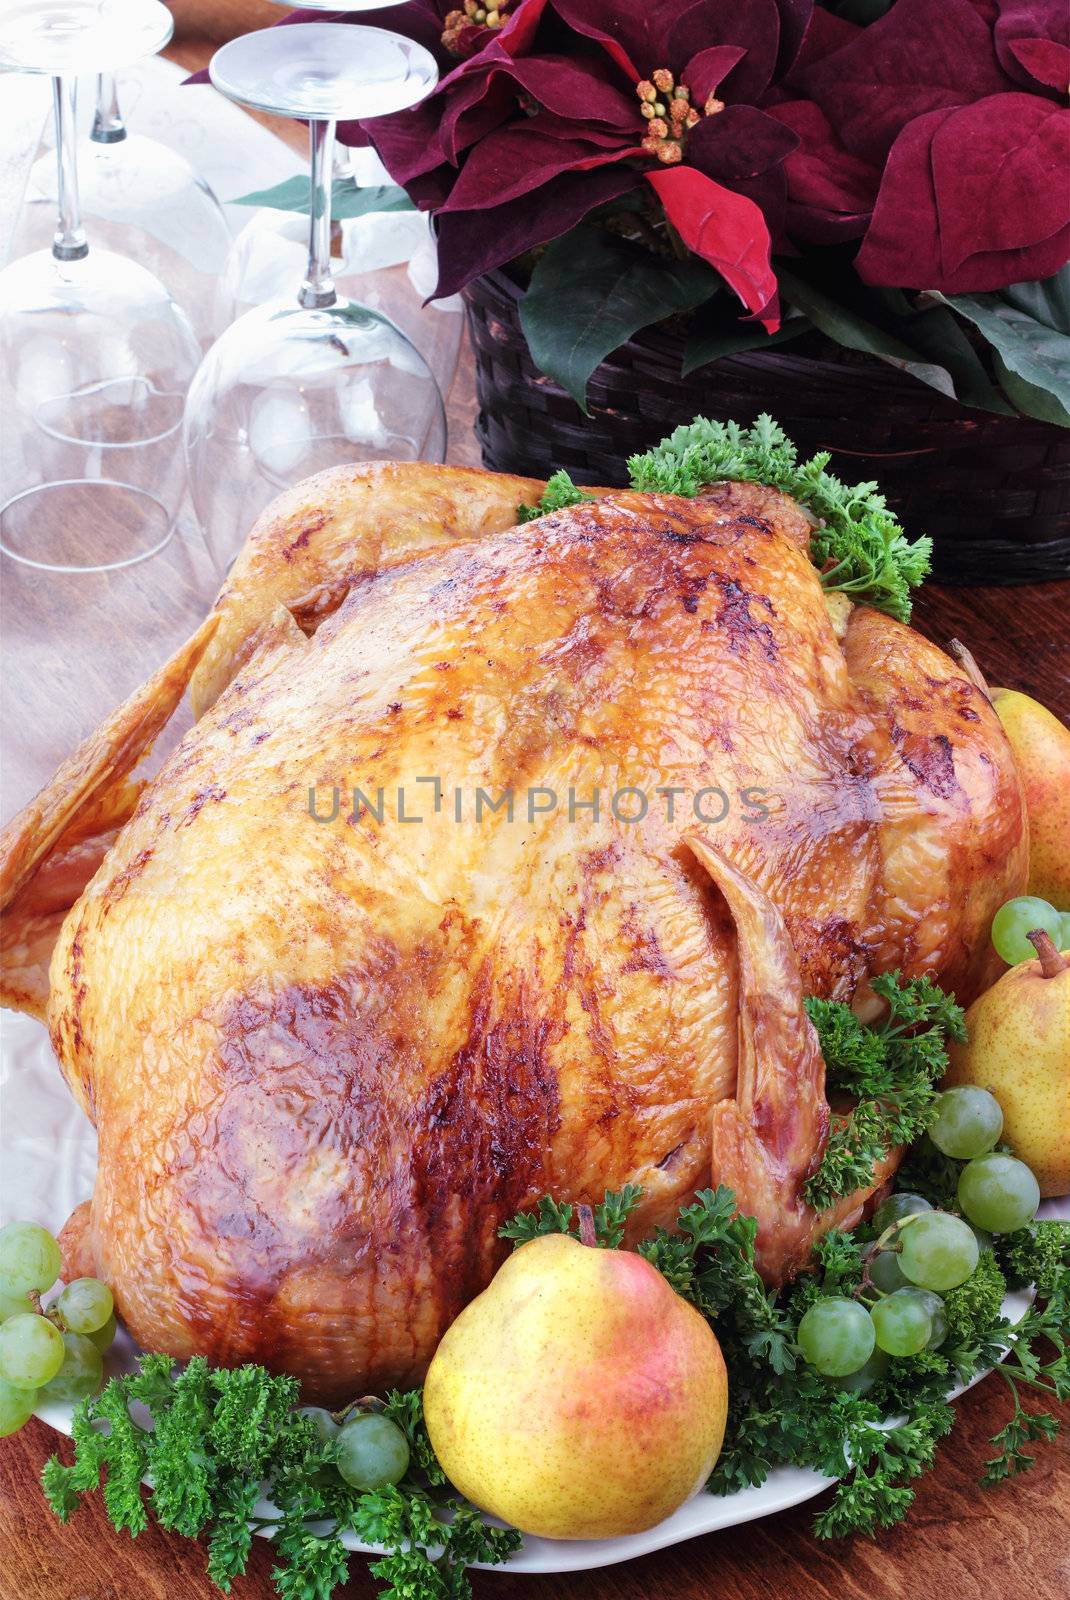 Thanksgiving or Christmas turkey dinner with fresh pears, grapes and parsley. Poinsettia flower arrangement and wine glasses in background.